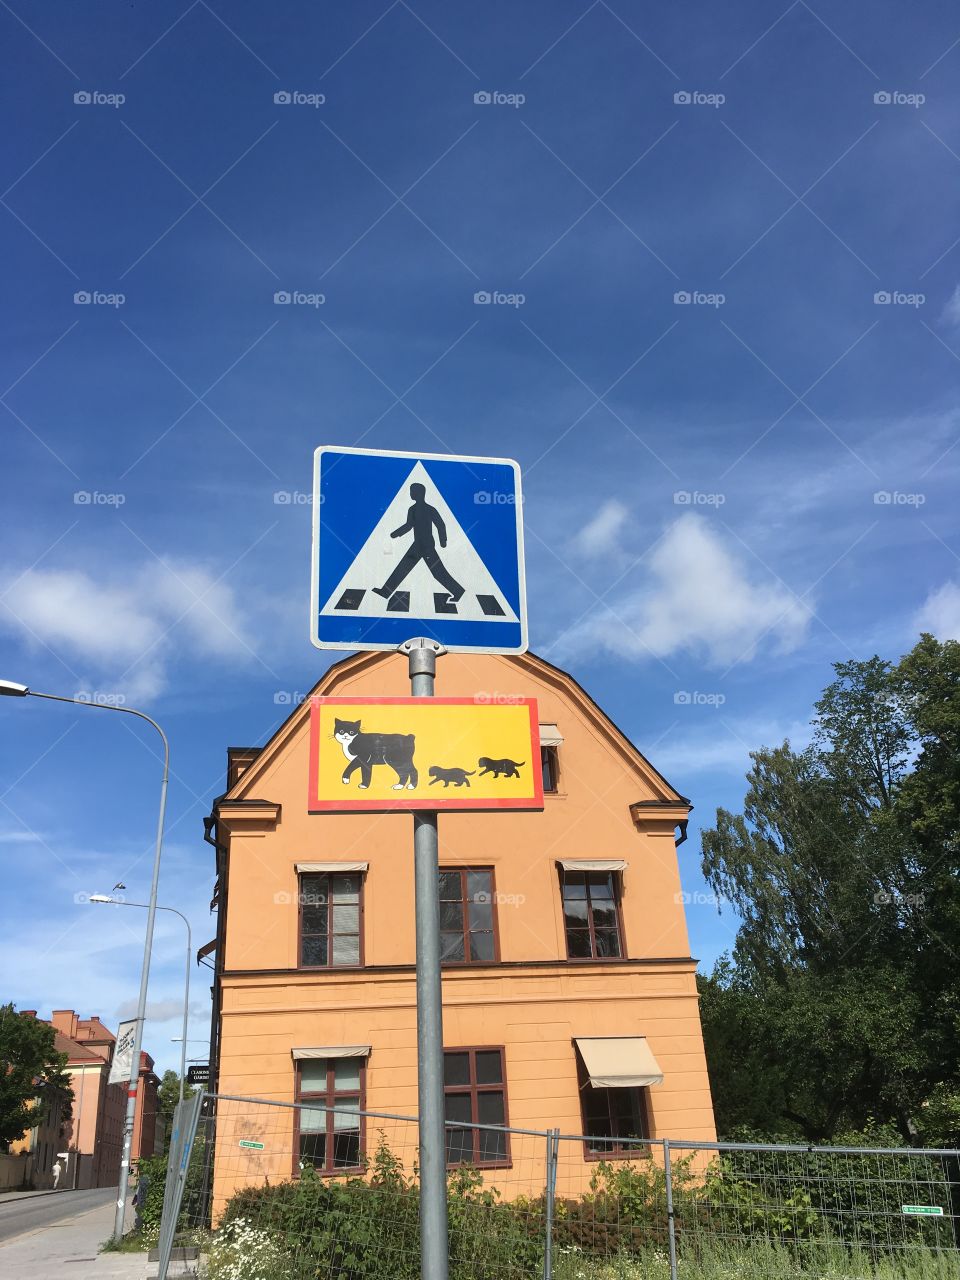 Traffic sign with cats in Uppsala Sweden